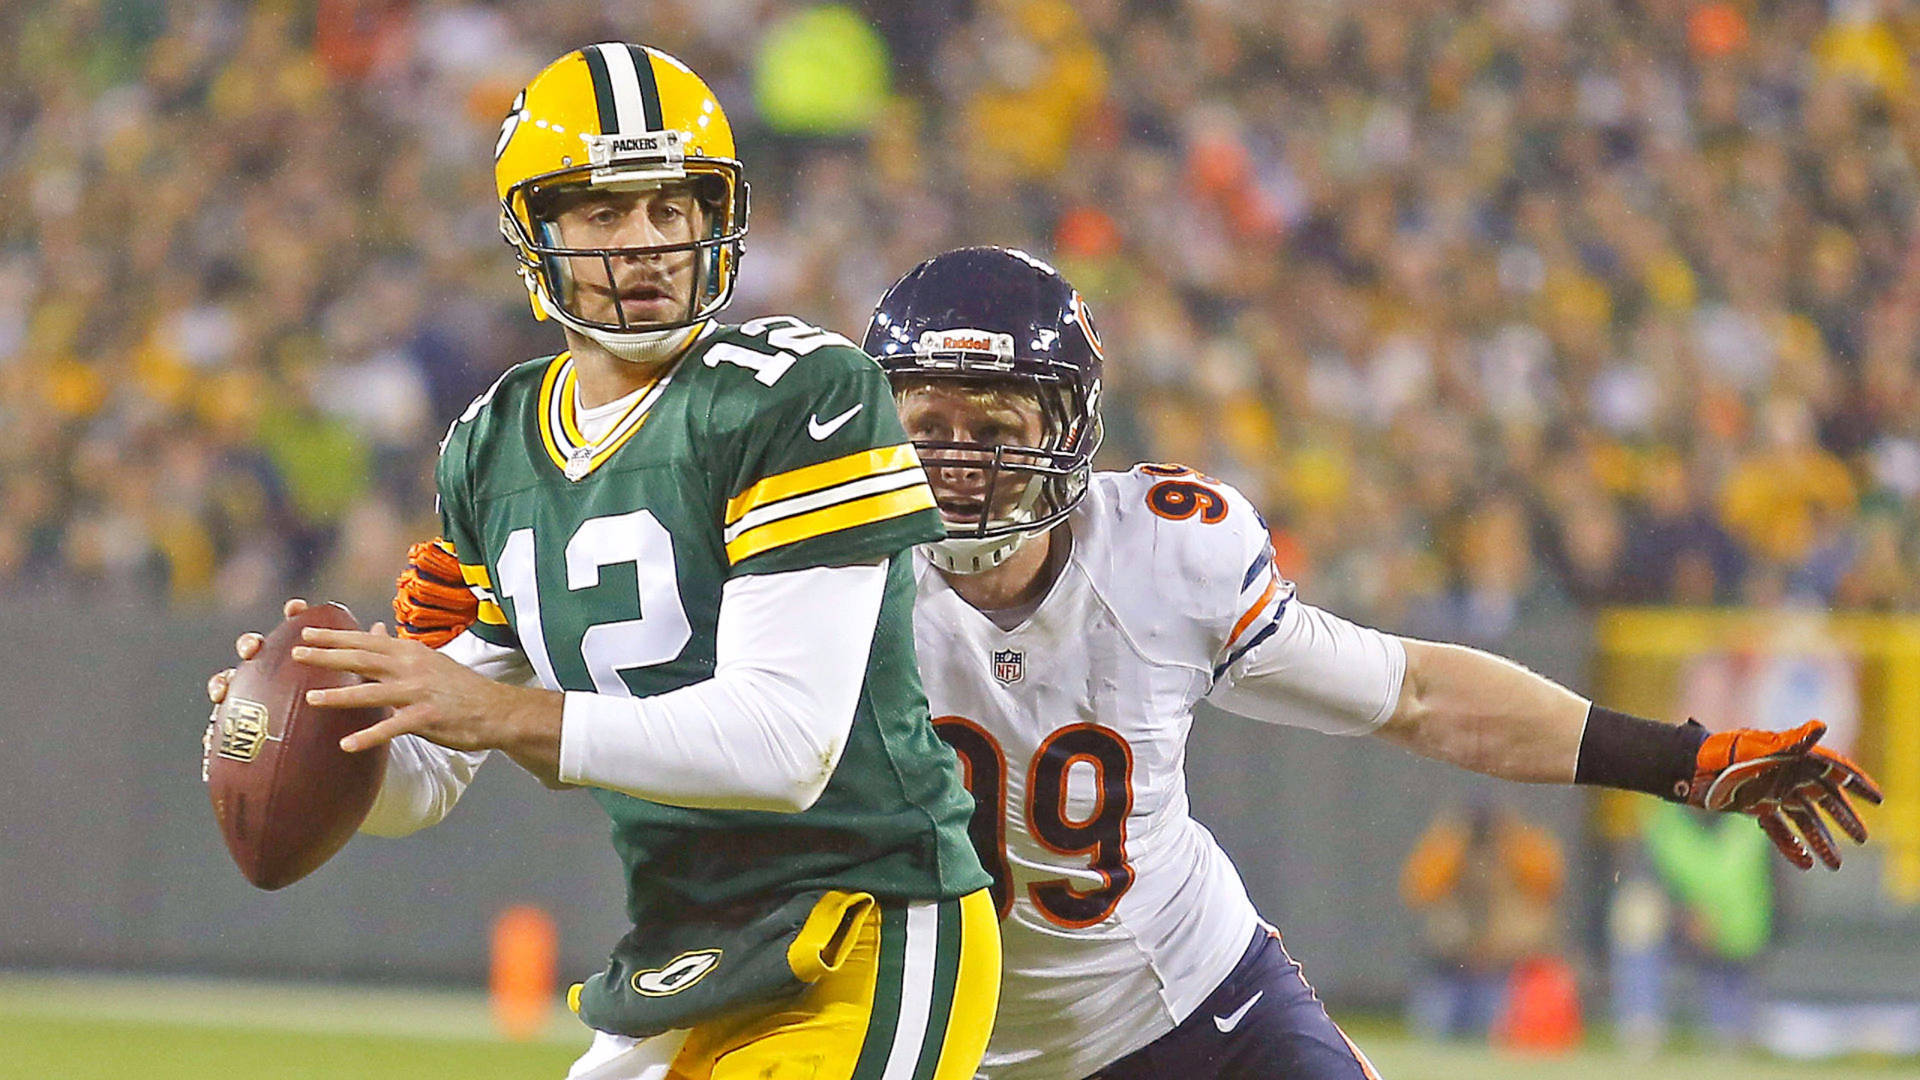 Aaron Rodgers Packers Vs Chicago Bears Wallpaper